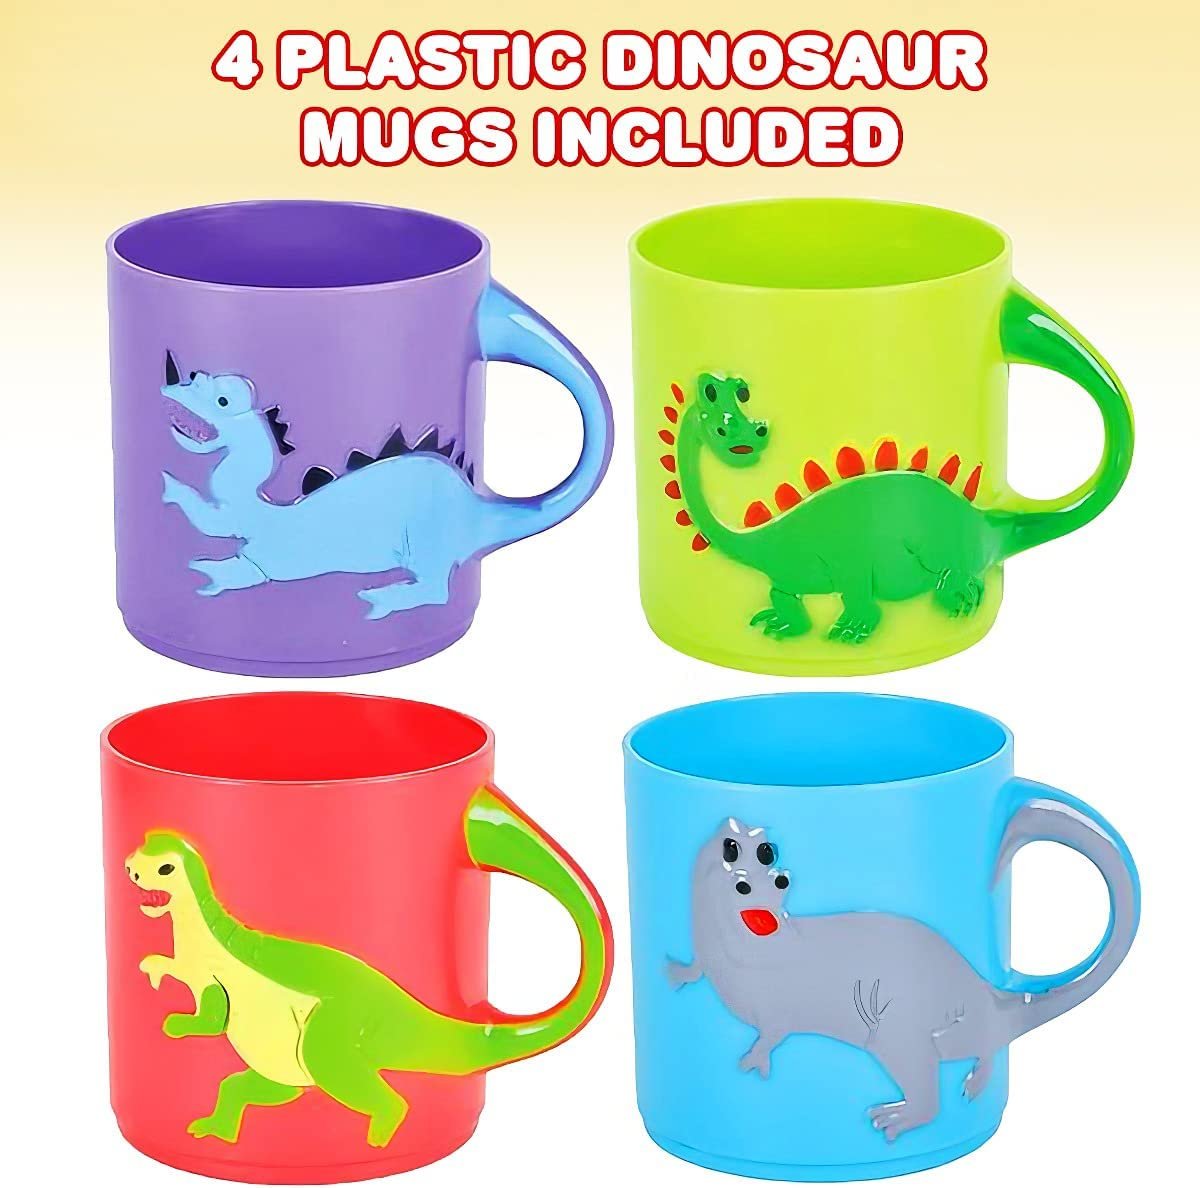 ArtCreativity Dinosaur Mugs for Kids, Set of 4, Plastic Dino Cups in Assorted Colors & Designs, Dinosaur Party Favors, Dinosaur Gifts for Boys and Girls, Unique Table Decorations for Themed Parties